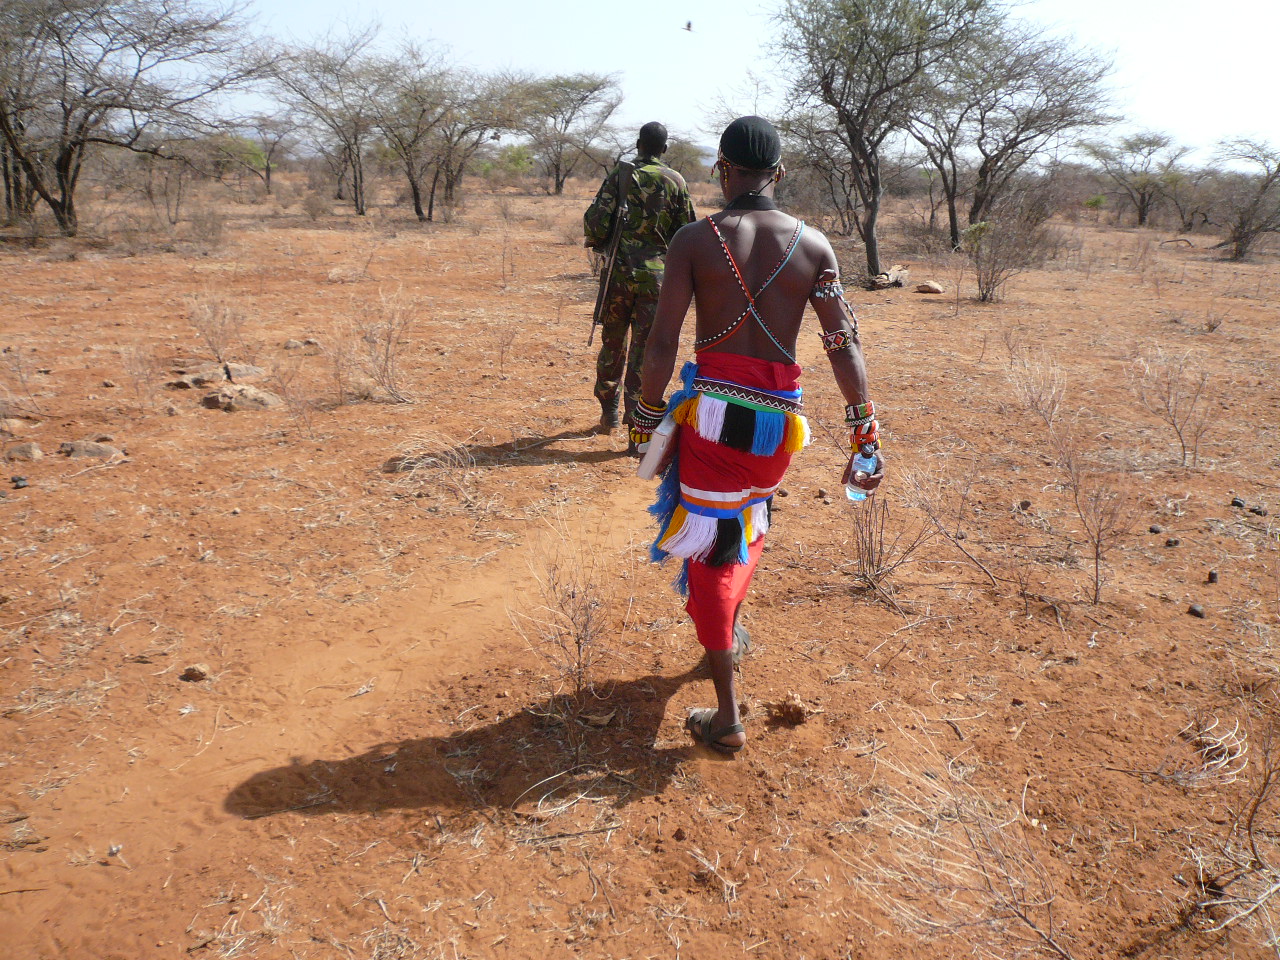 Bush walk with armed ranger and local Masai